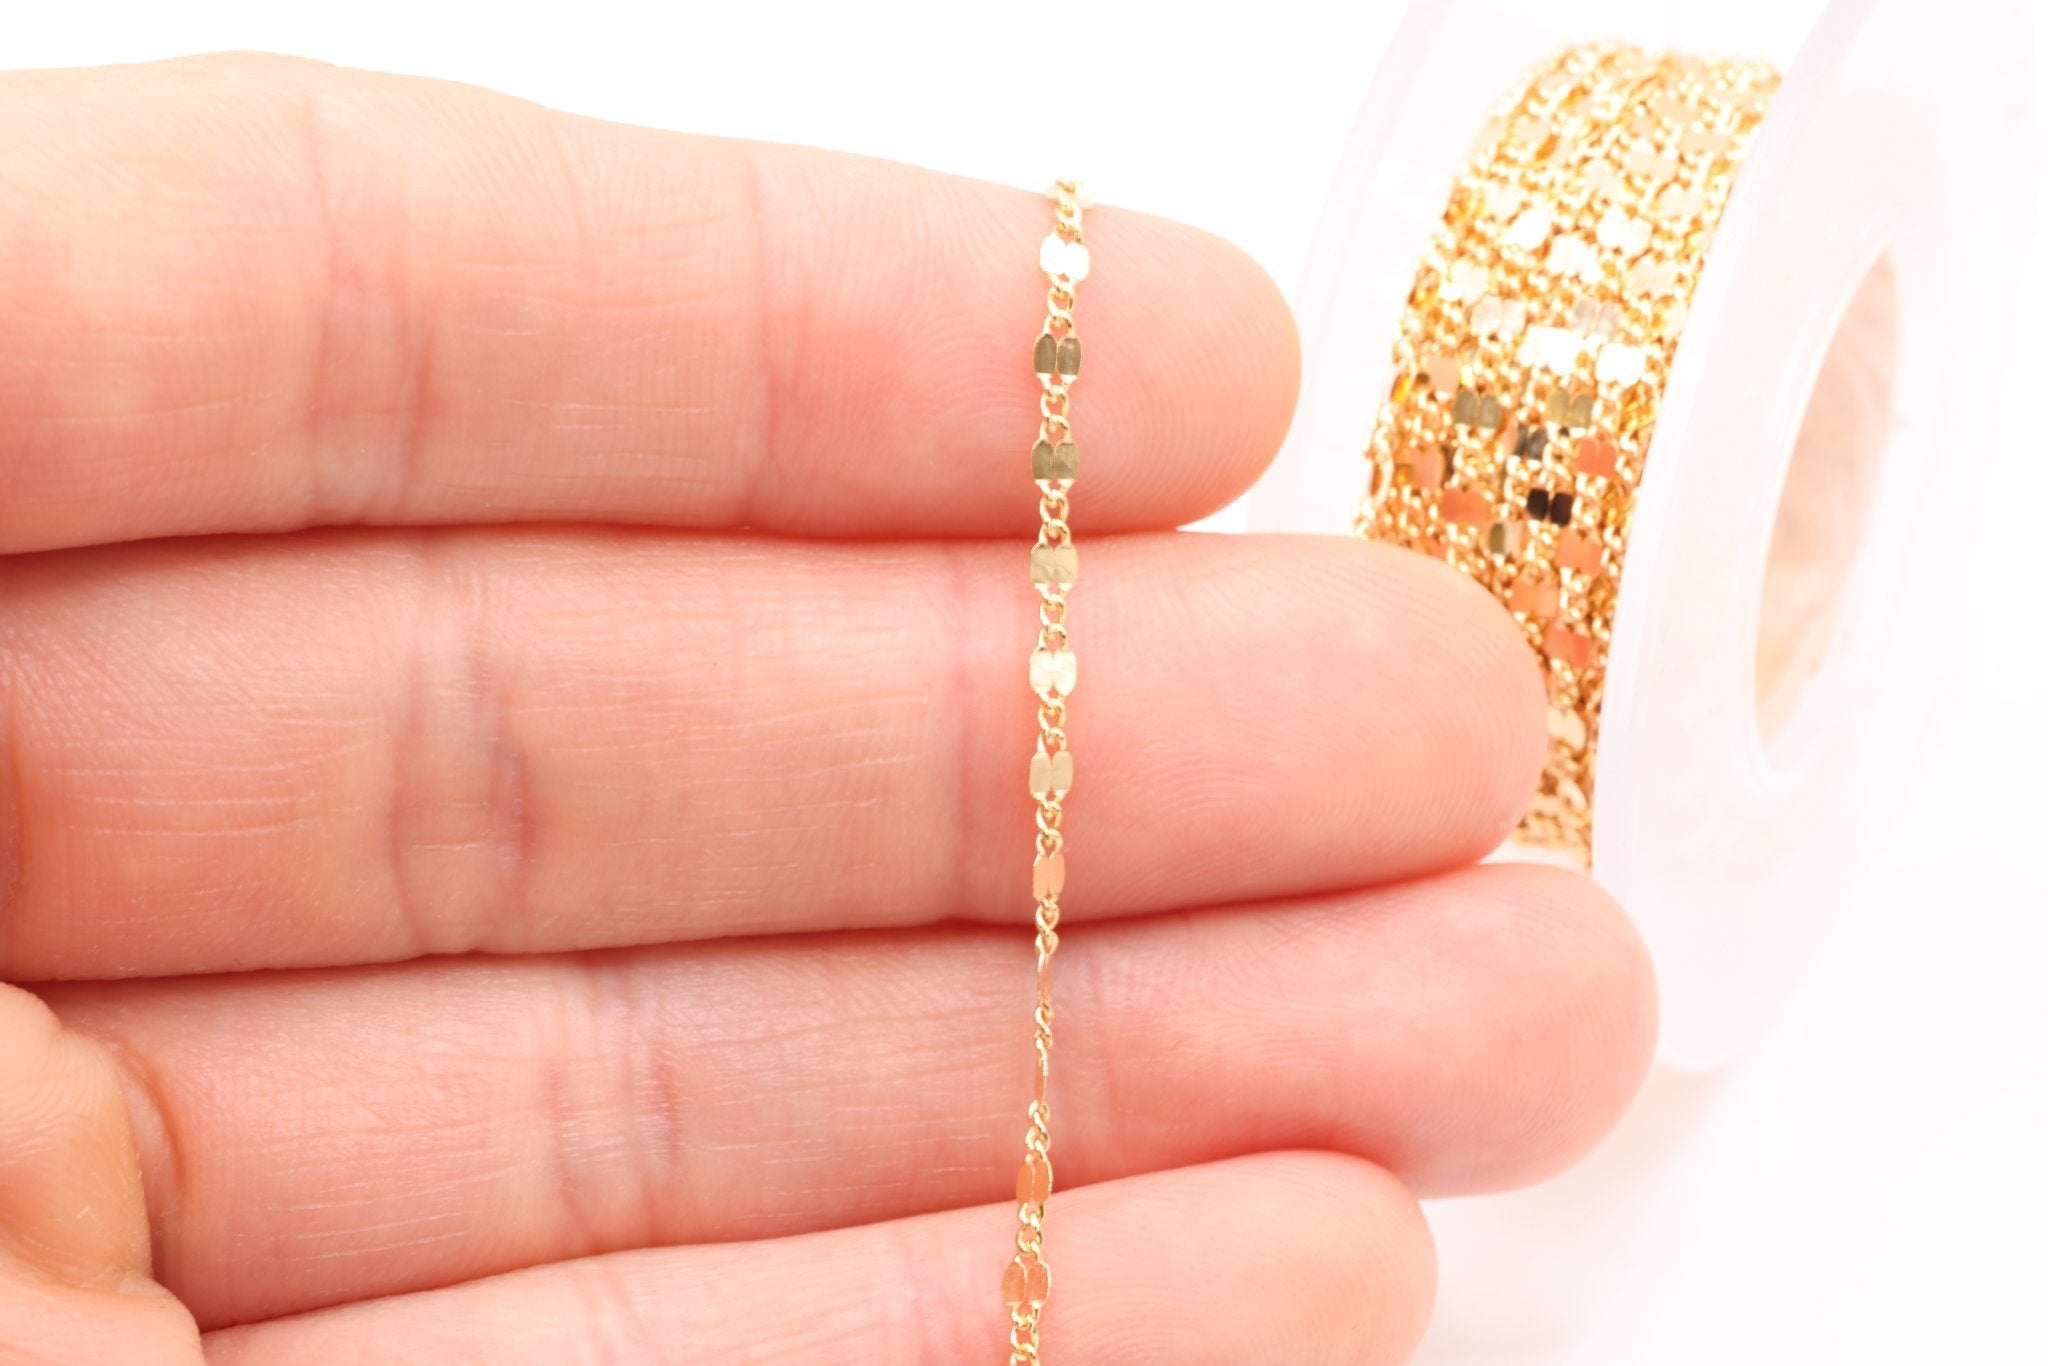 2mm x 2mm Dapped Link Chain, 14K Gold - Filled, Spool or Footage Chain - HarperCrown